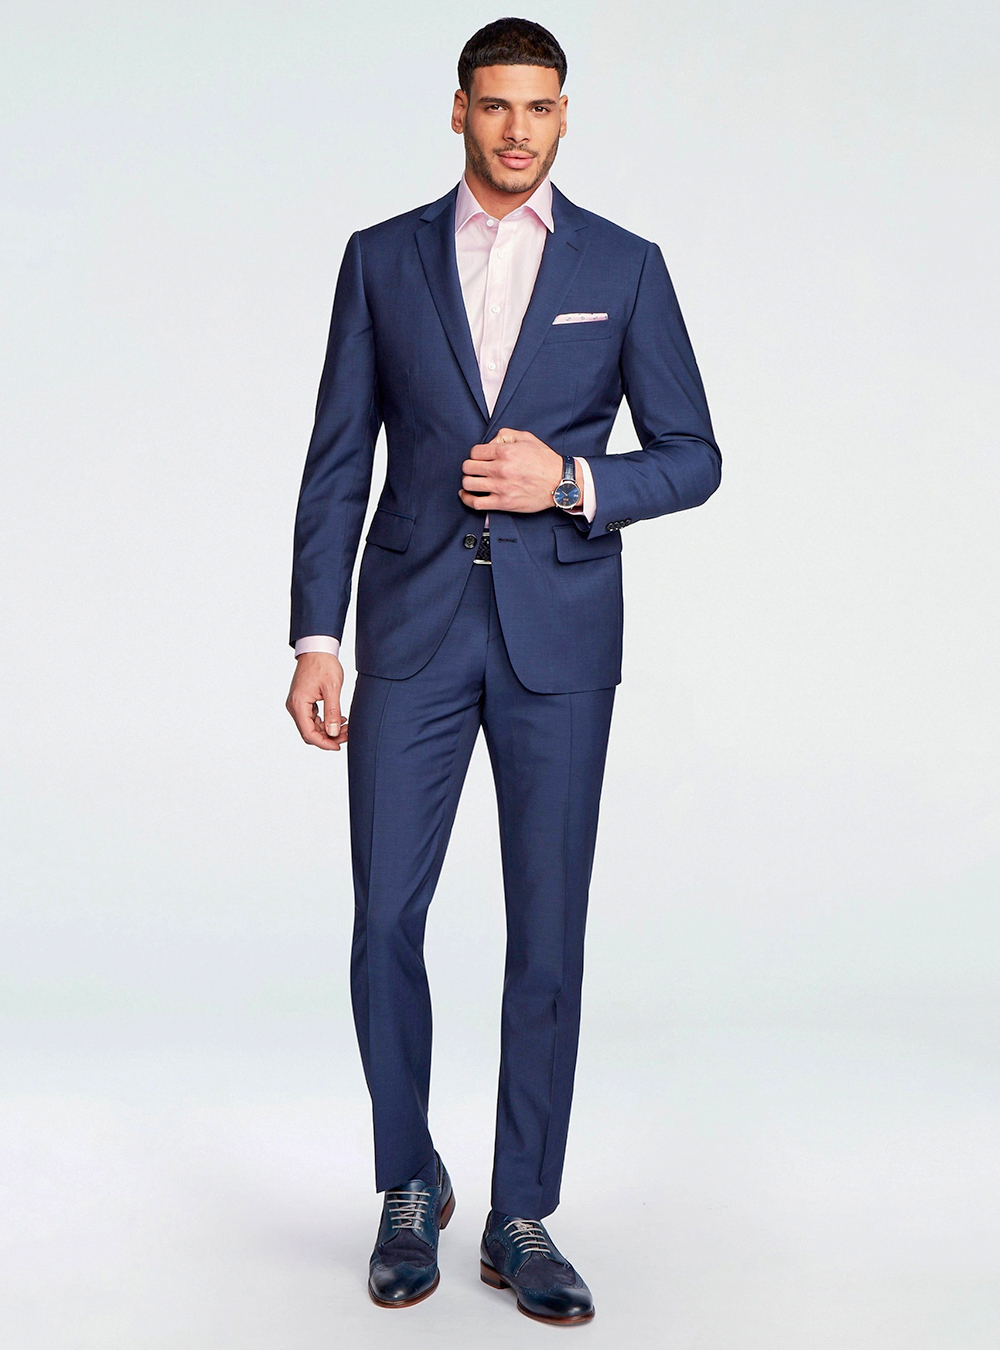 Navy blue suit, pink dress shirt and navy brogue shoes